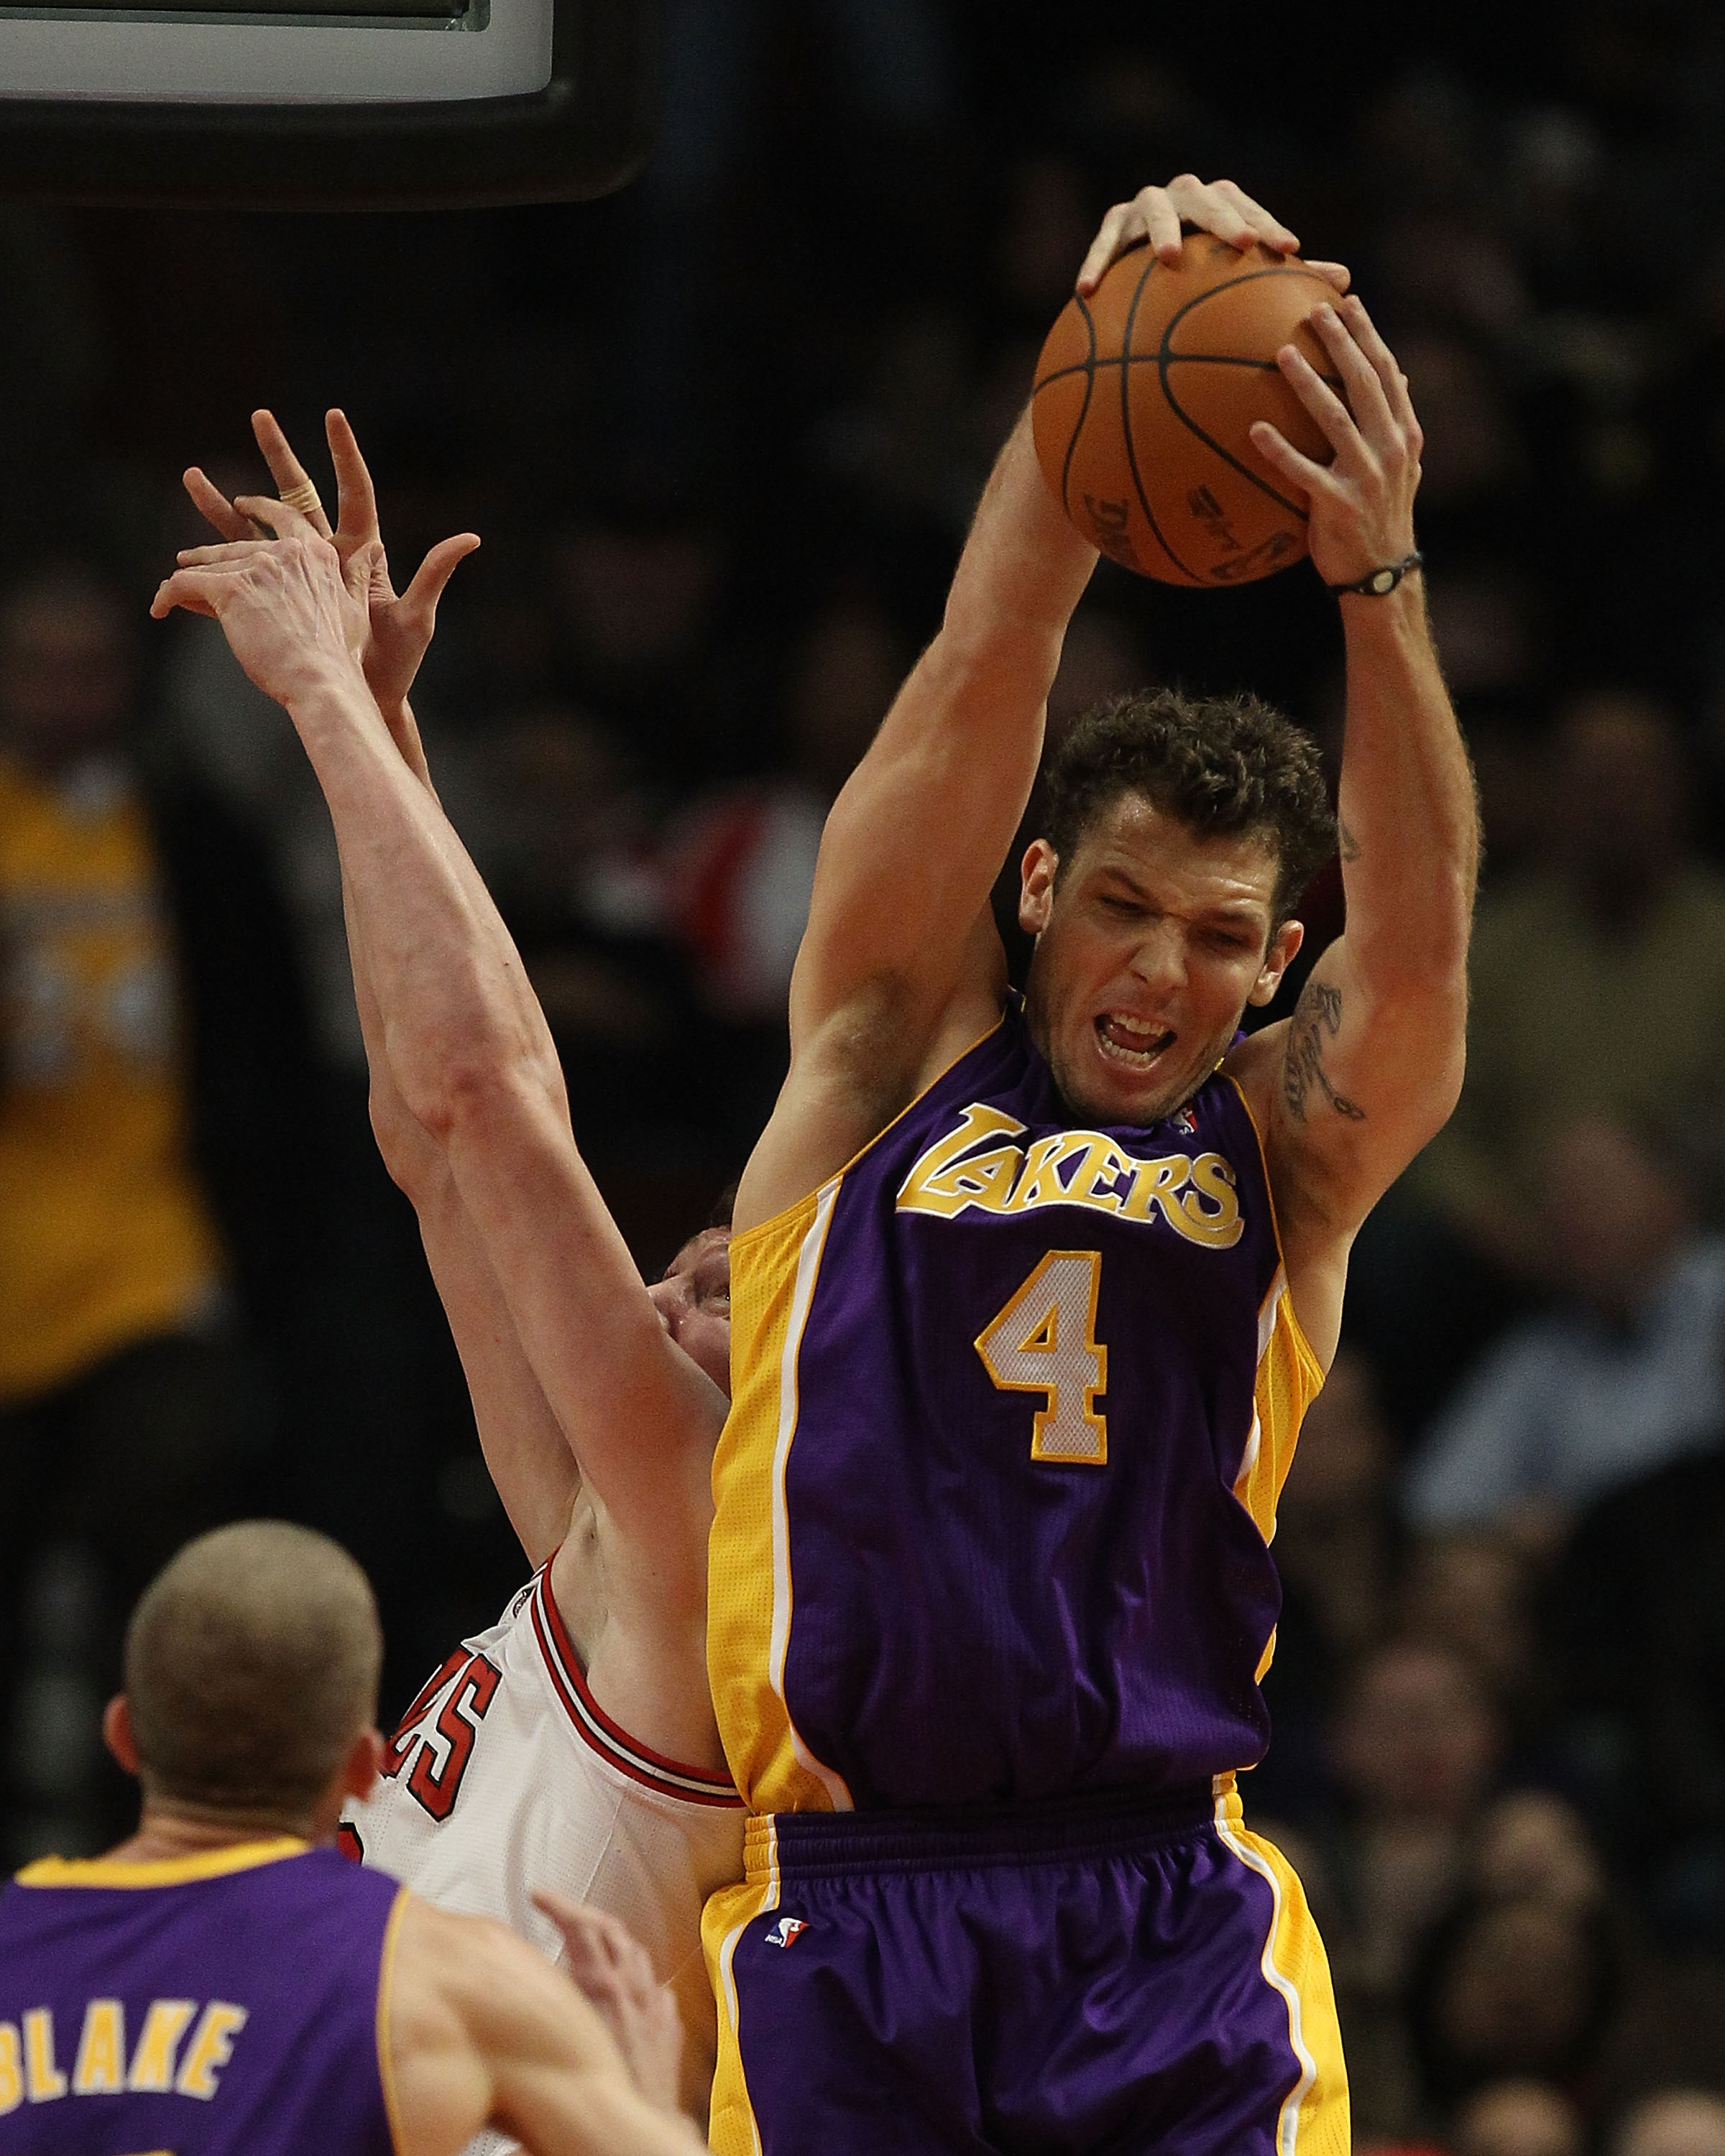 CHICAGO, IL - DECEMBER 10: Luke Walton #4 of the Los Angeles Lakers leaps over Omer Asik #3 of the Chicago Bulls to grab a rebound at the United Center on December 10, 2010 in Chicago, Illinois. NOTE TO USER: User expressly acknowledges and agrees that, b